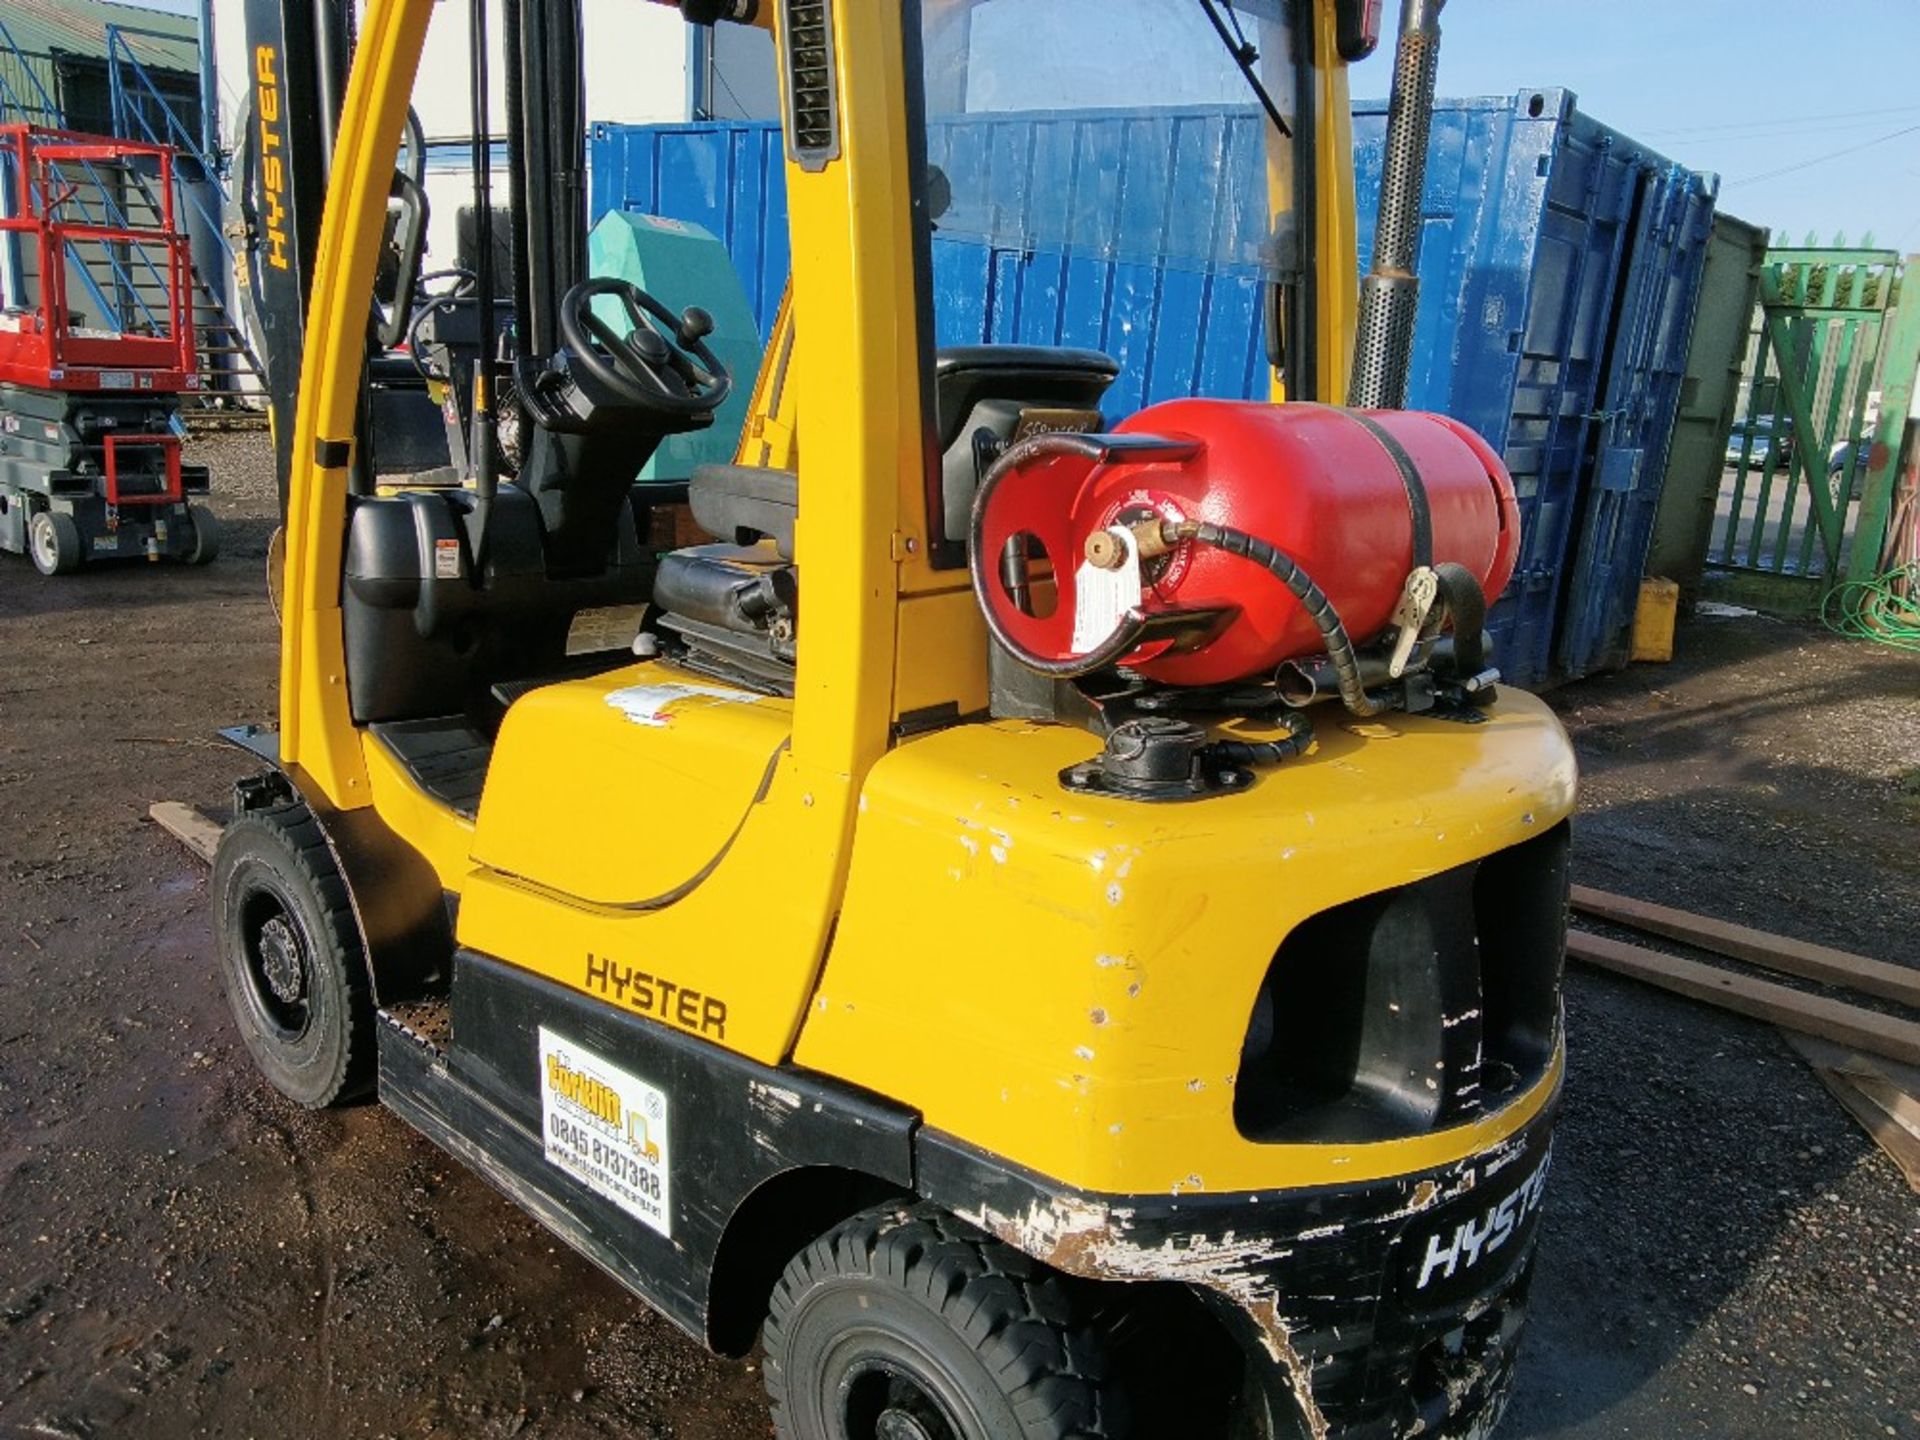 HYSTER 2.6 GAS POWERED FORKLIFT TRUCK WITH SIDE SHIFT. YEAR 2008. 2270KG RATED CAPACITY SOURCED FRO - Image 3 of 9